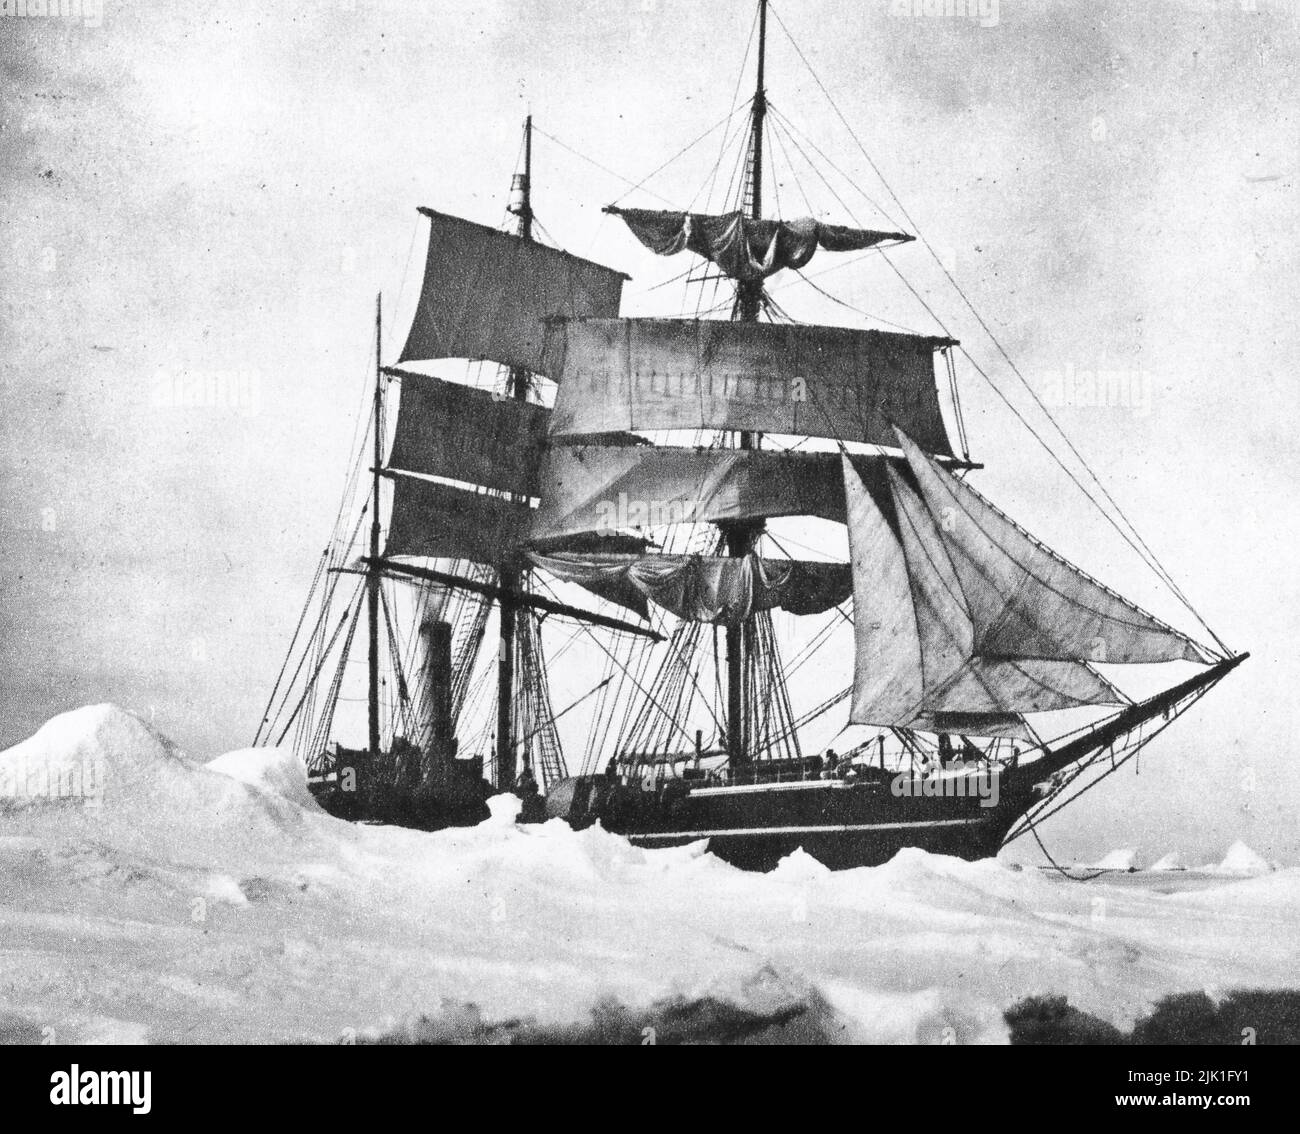 Terra Nova, Captive in Heavy Pack, 1910. By Herbert Ponting (1870-1935).The Terra Nova Expedition (British Antarctic Expedition), was an expedition to Antarctica which took place between 1910 and 1913. Led by Captain Robert Falcon Scott (1868-1912), who wished to continue the scientific work that he had begun when leading the Discovery Expedition from 1901 to 1904, and wanted to be the first to reach the geographic South Pole. He and four others attained the pole on 17th January 1912, where they found that a Norwegian team led by Roald Amundsen (1872-1928) had preceded them. Scott's party of f Stock Photo